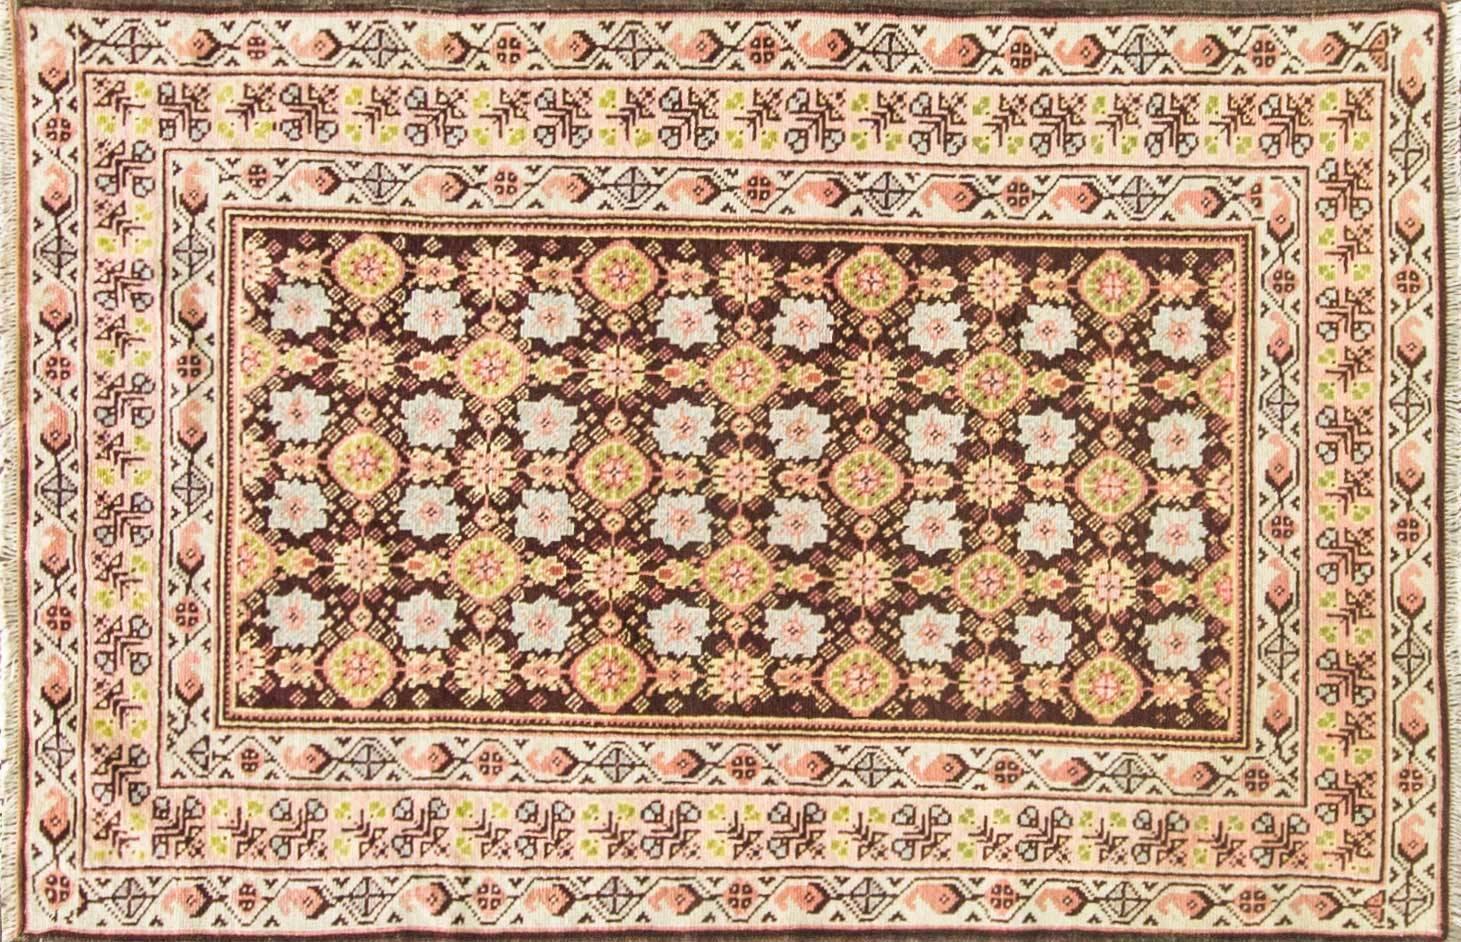 A very decorative rug.
The Romanian Oltenia rugs were produced in the Southern Romanian province of Oltenia, these vibrant rugs are known for using predominantly strong colors such as red and blacks against green or sandy-colored backgrounds.

The